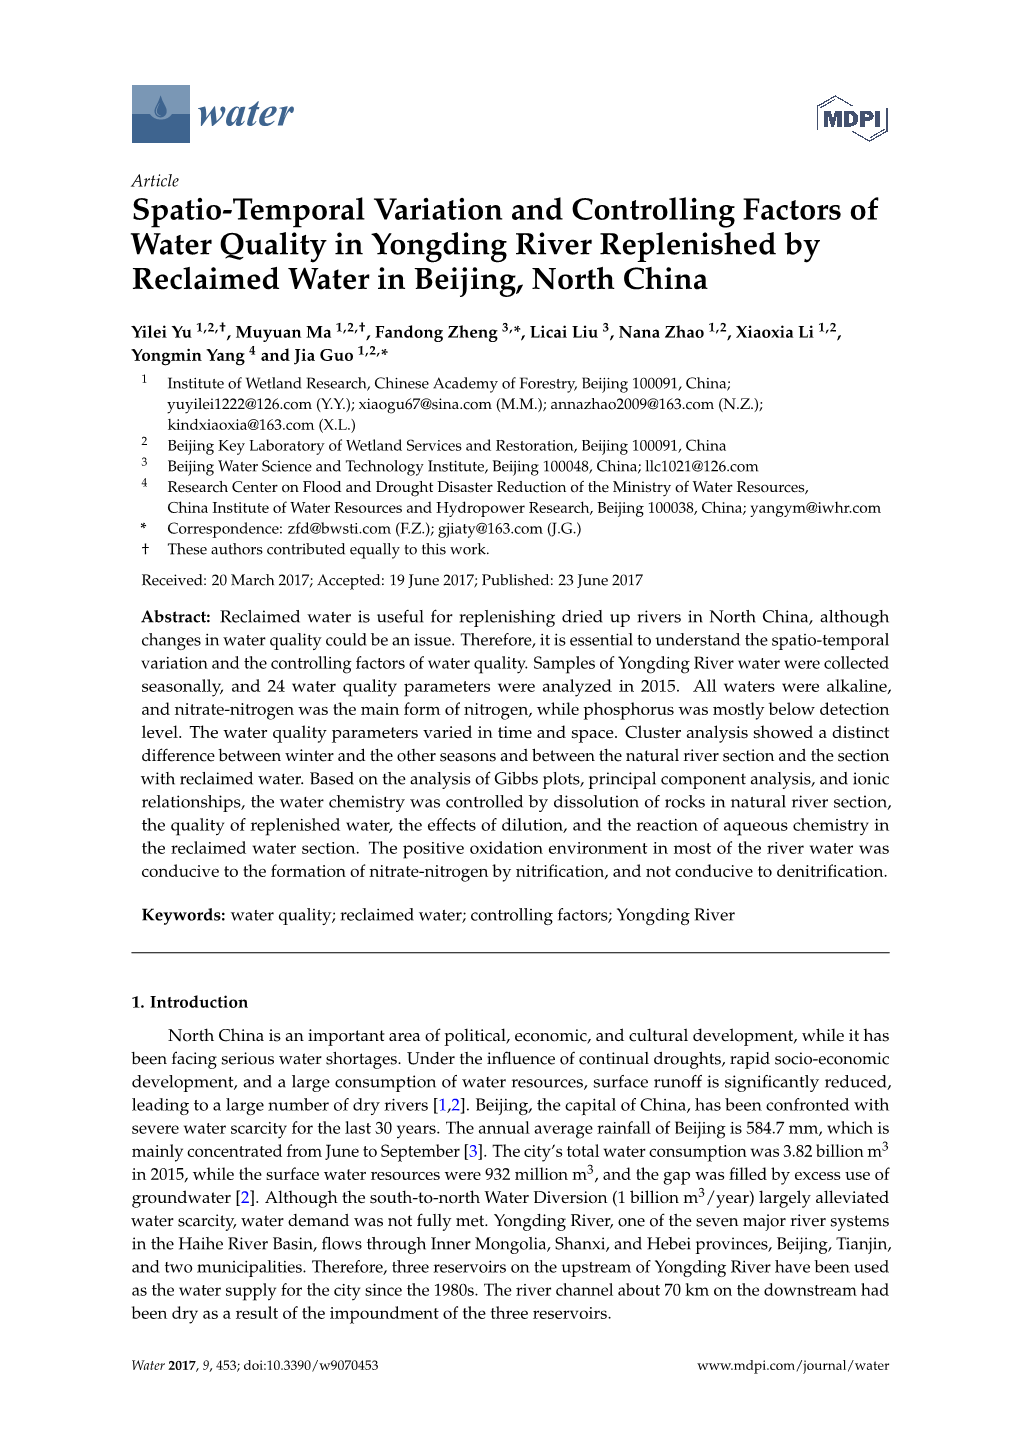 Spatio-Temporal Variation and Controlling Factors of Water Quality in Yongding River Replenished by Reclaimed Water in Beijing, North China